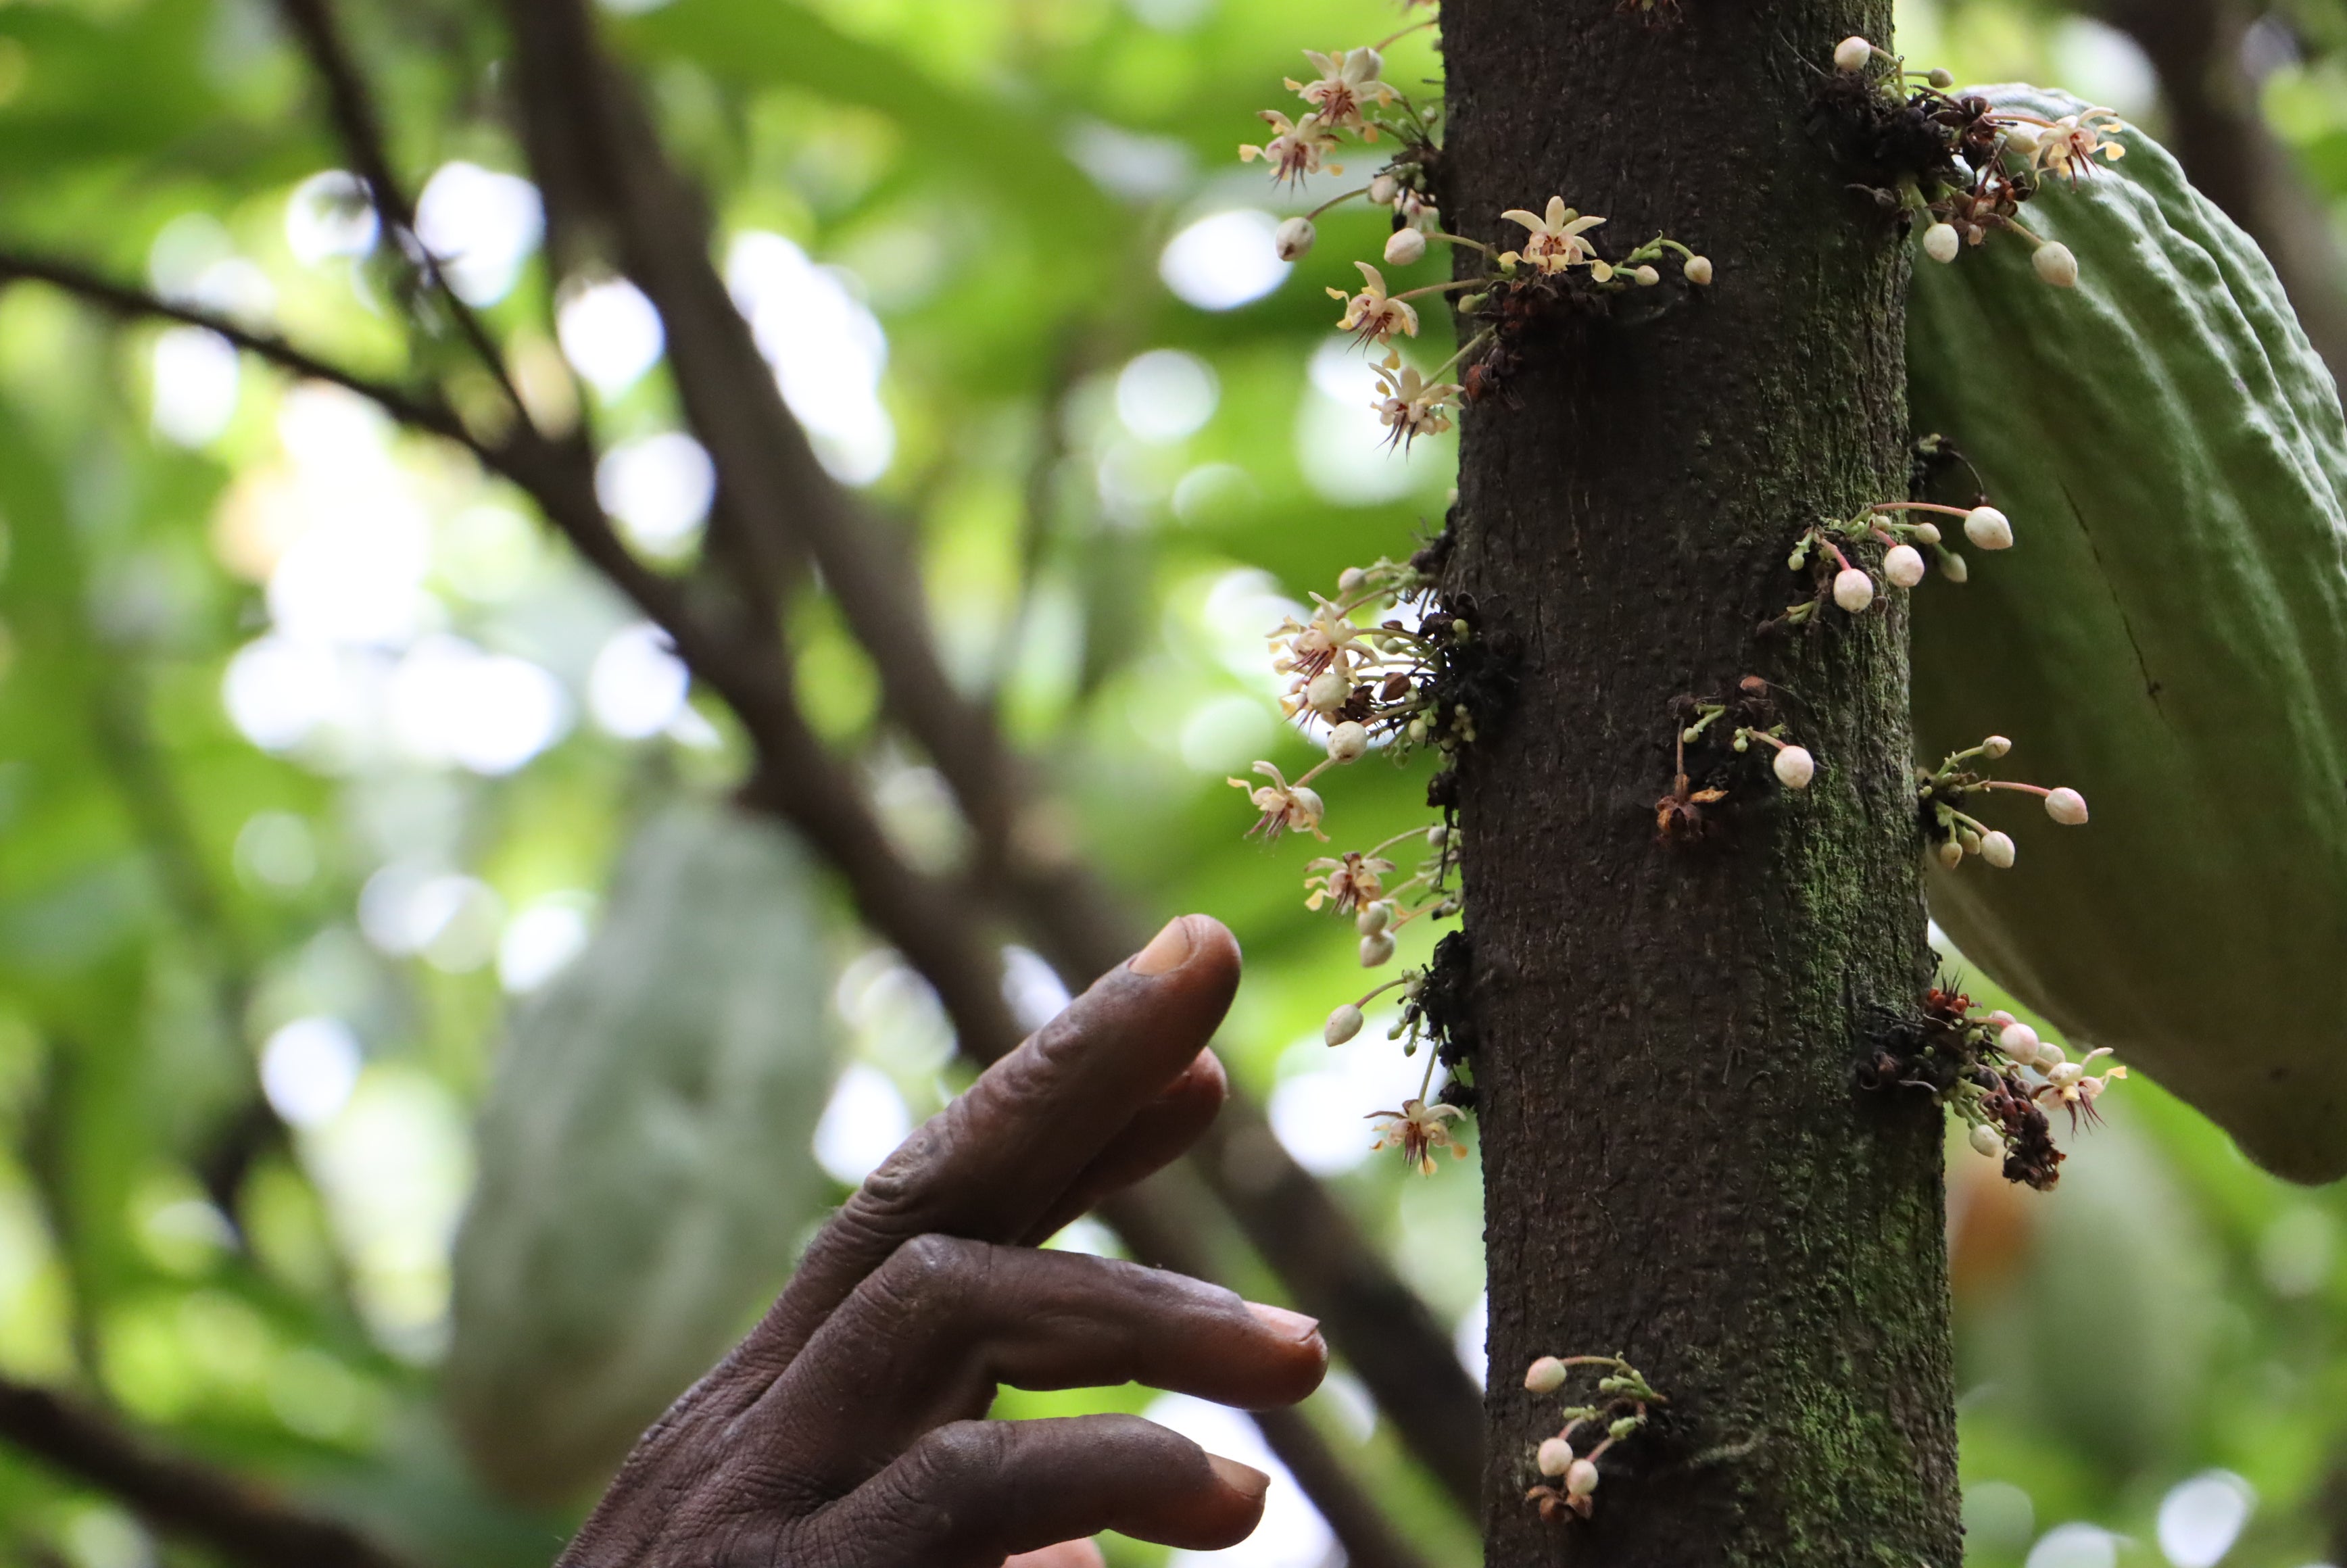 Hand pollination is a technique adopted to increase cacao yields.